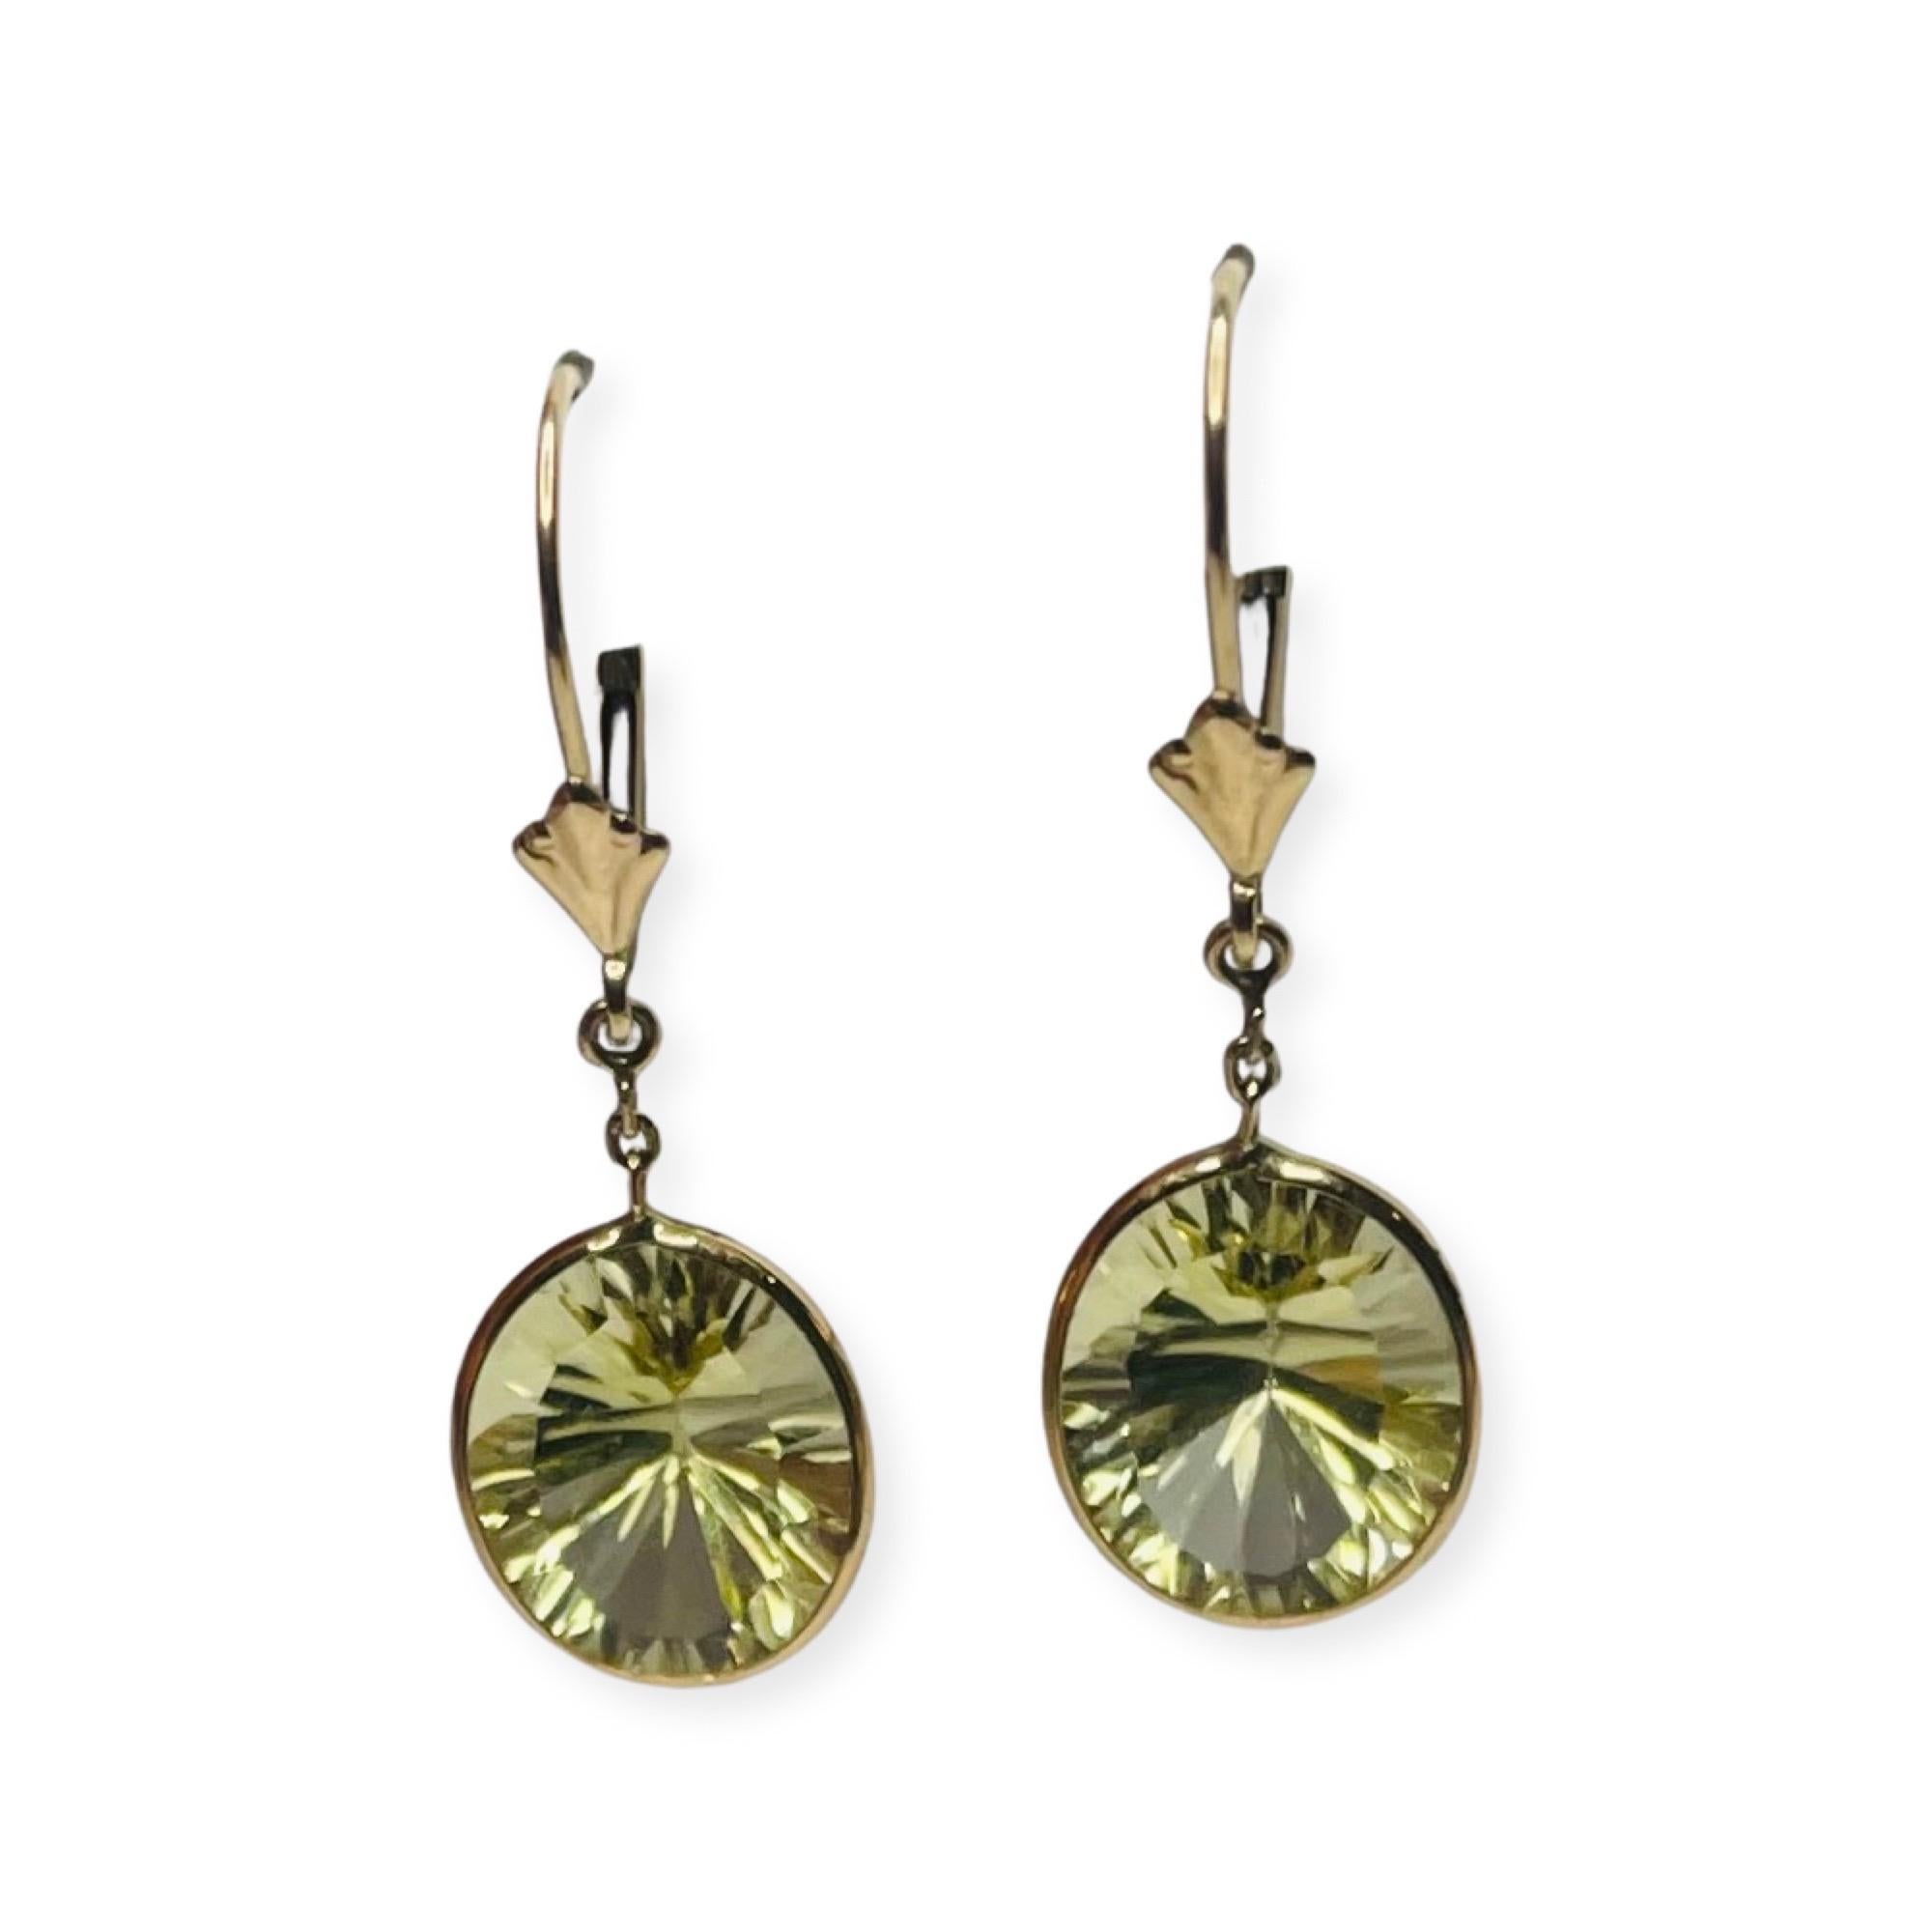 Lithos 14K Yellow Gold Lemon Quartz Earrings. They are 12.0 mm x 10.0 mm. They are bezel set. They hang from French wires. 
400-70-842